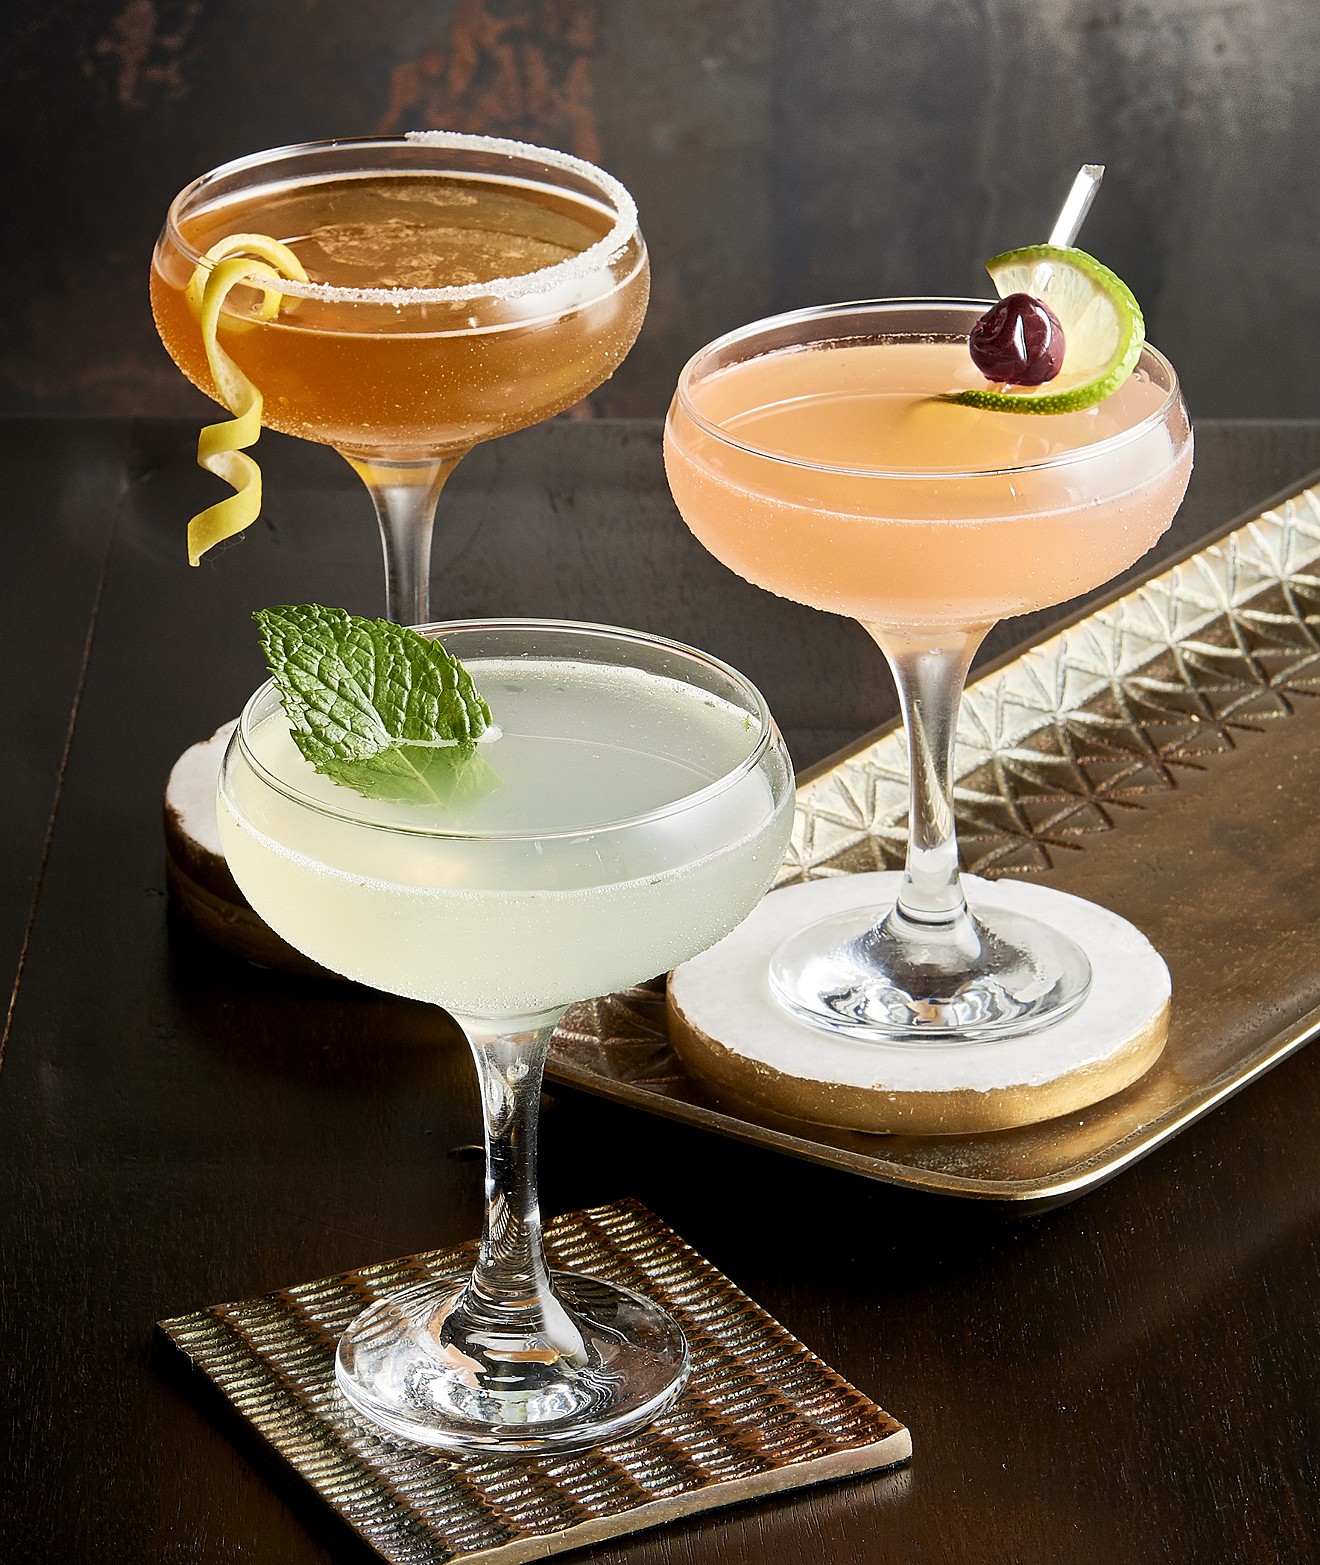 Celebrate Repeal Day with half-priced classic cocktails at III Forks.